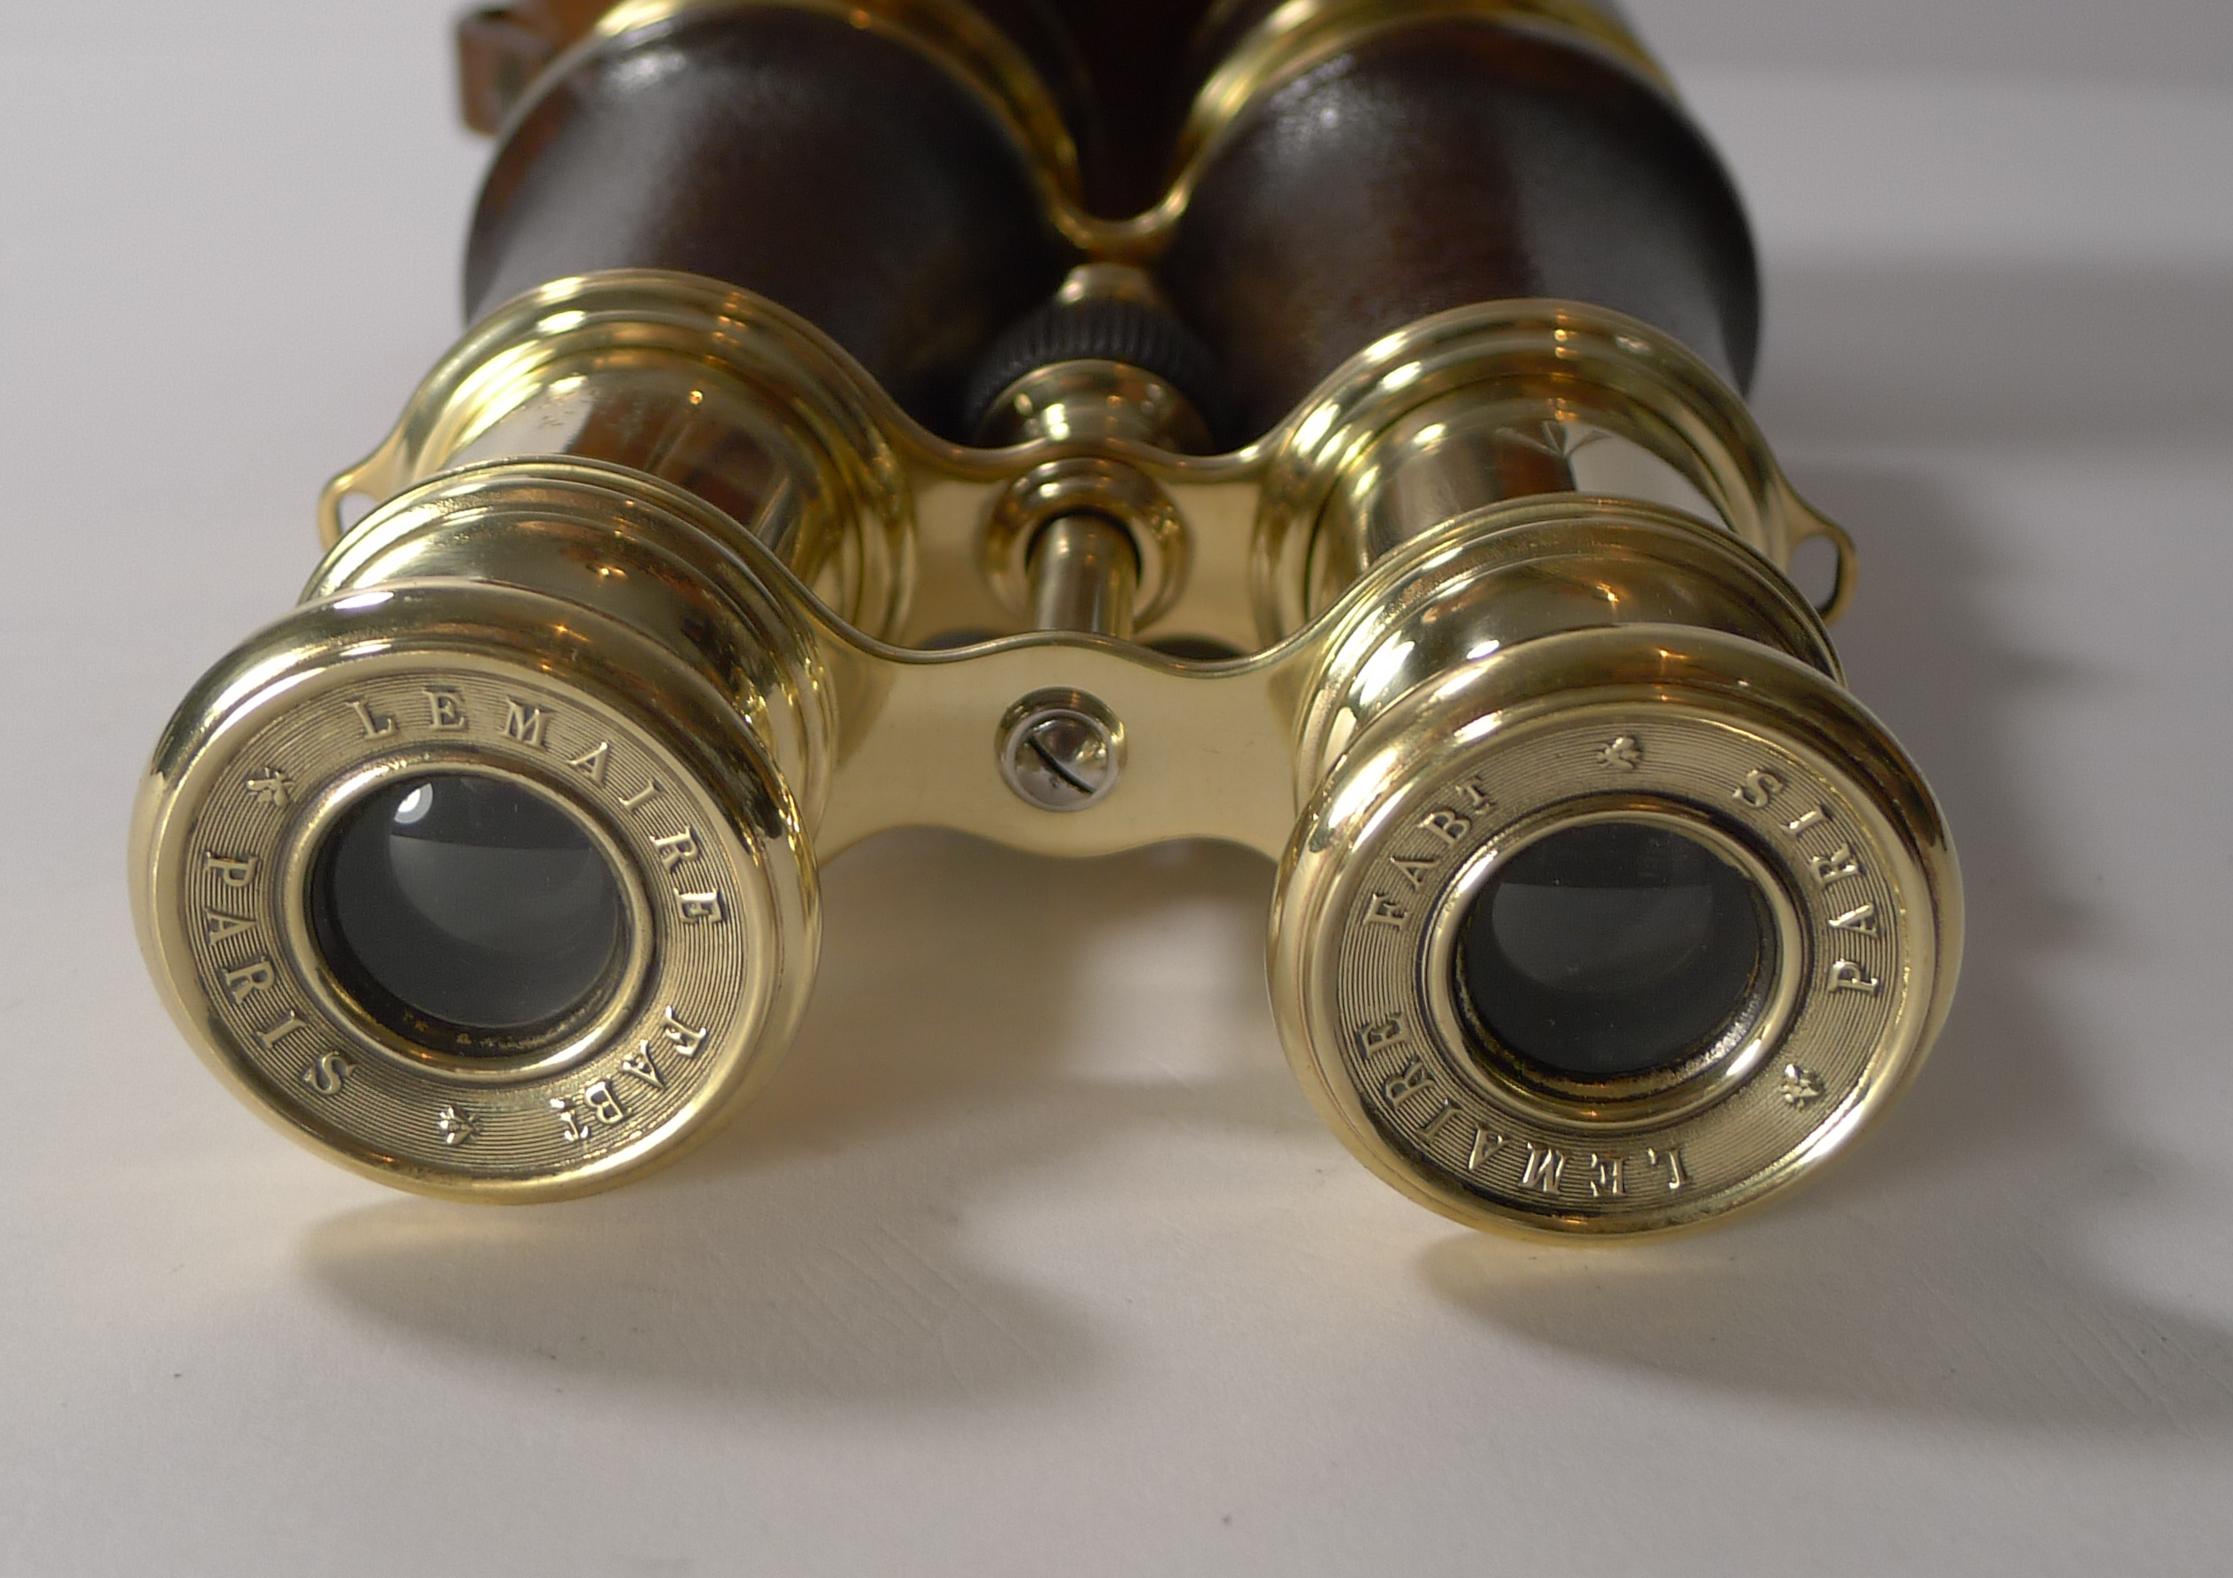 French WW1 Binoculars and Case, British Officer's Issue